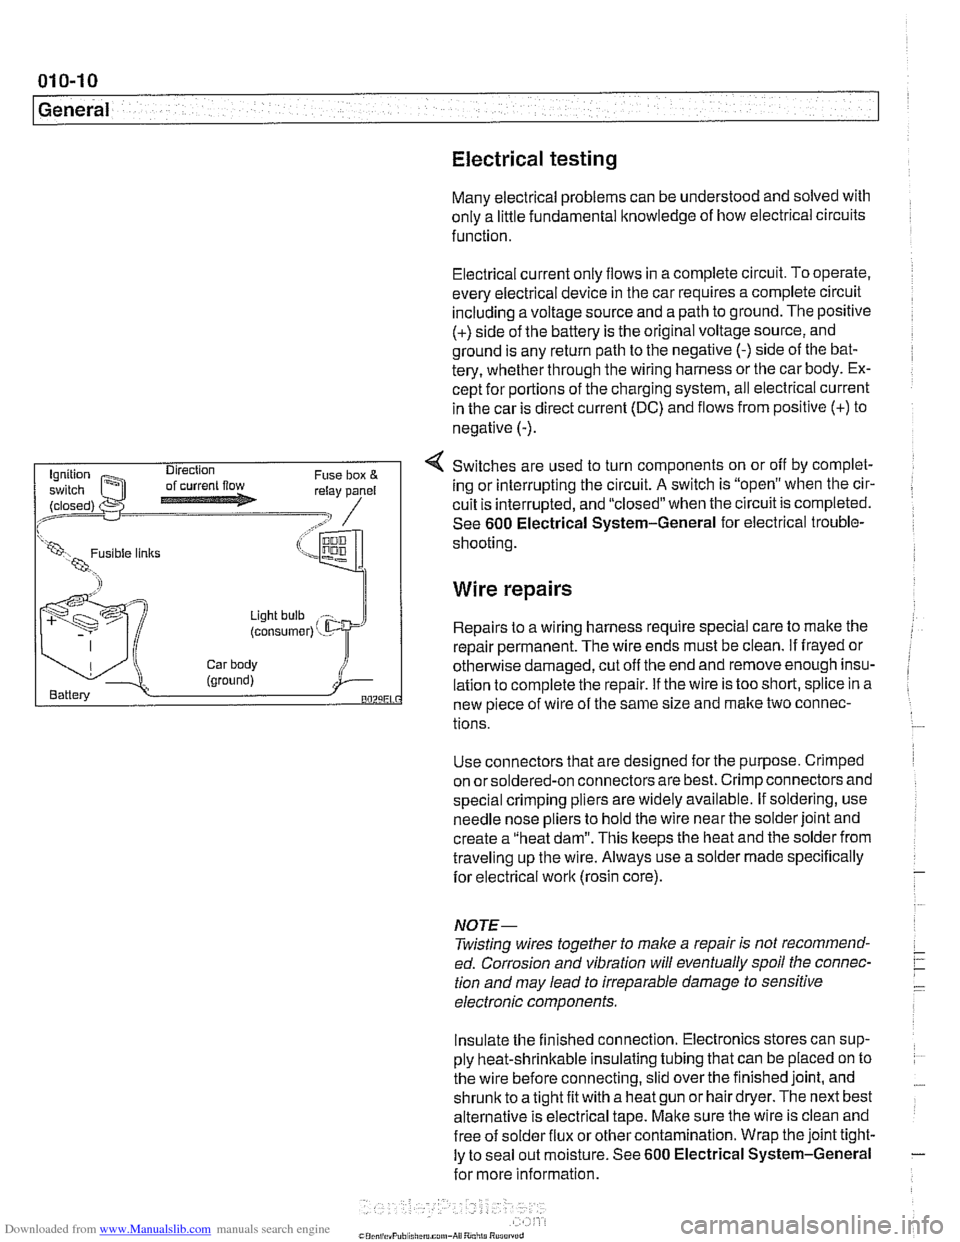 BMW 528i 1997 E39 Workshop Manual Downloaded from www.Manualslib.com manuals search engine 
01 0-1 0 
General 
Electrical testing 
Many electrical problems  can be understood and solved with 
only a little fundamental  knowledge  of h